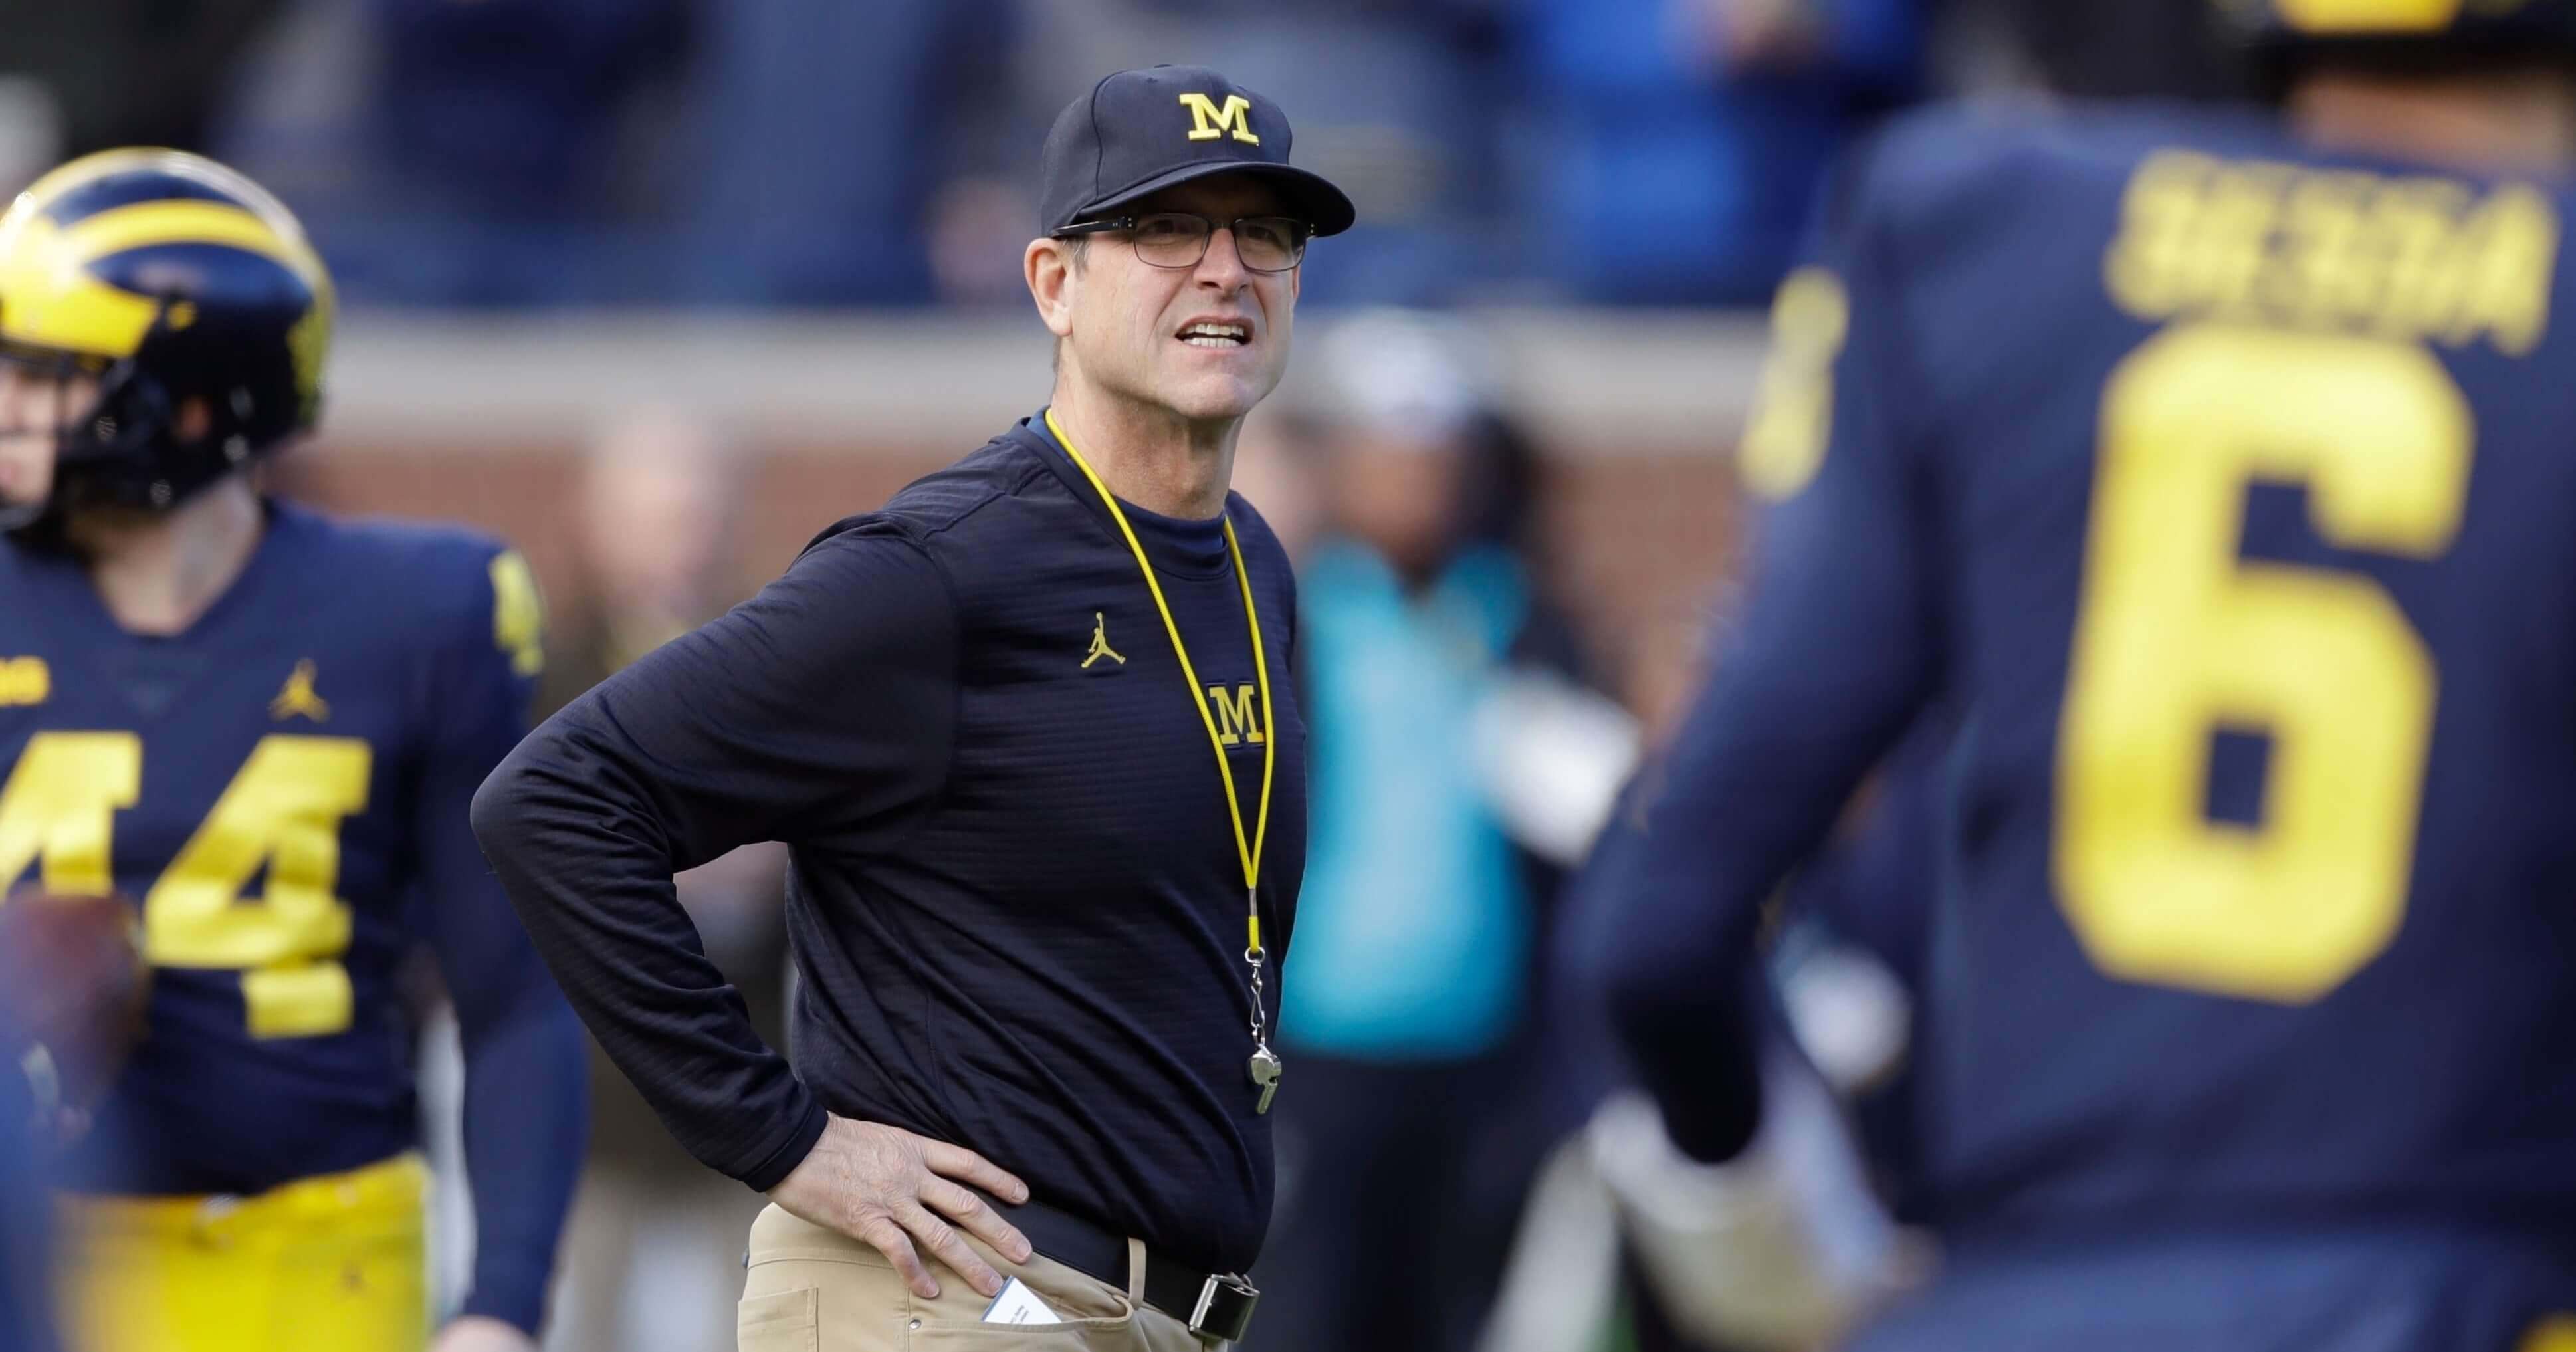 In this Nov. 25, 2017, file photo, Michigan coach Jim Harbaugh watches players warm up for an NCAA college football game against Ohio State in Ann Arbor, Mich.